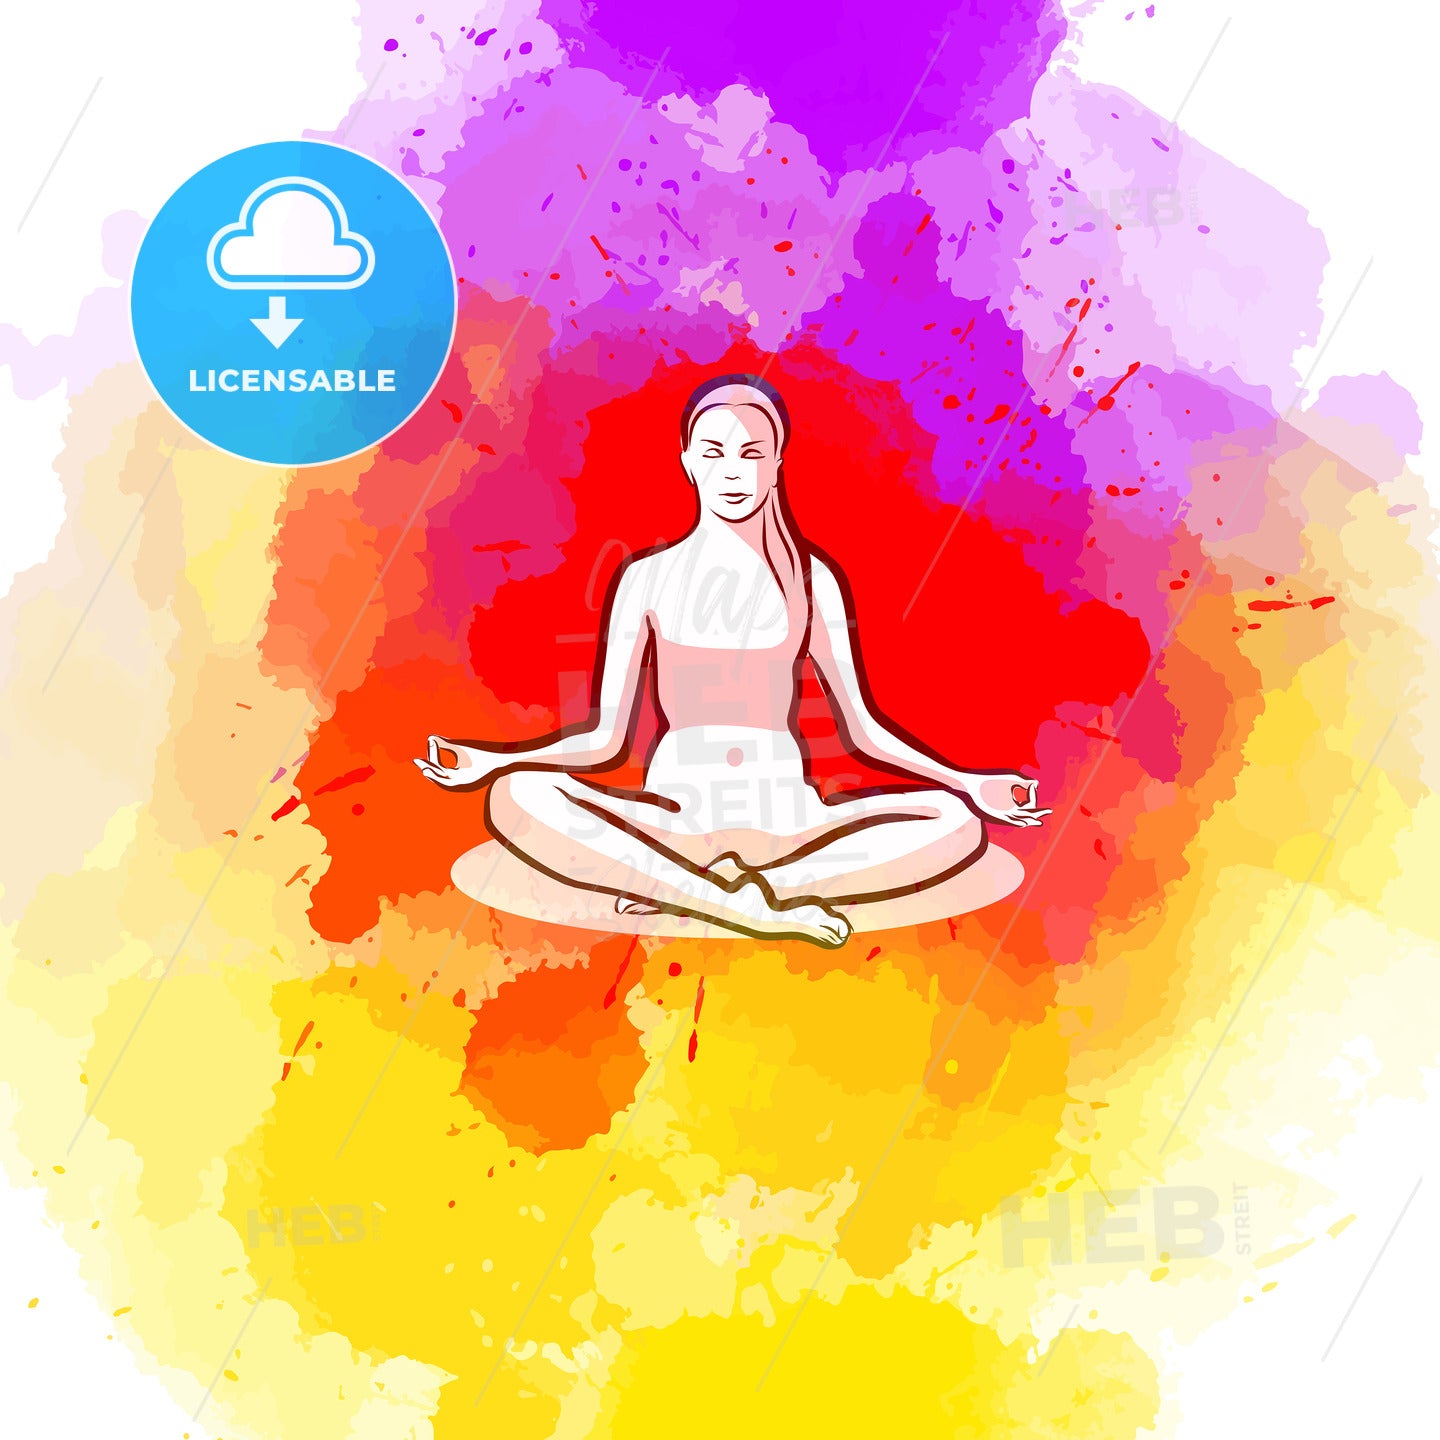 Sitting yoga pose on colorful background – instant download